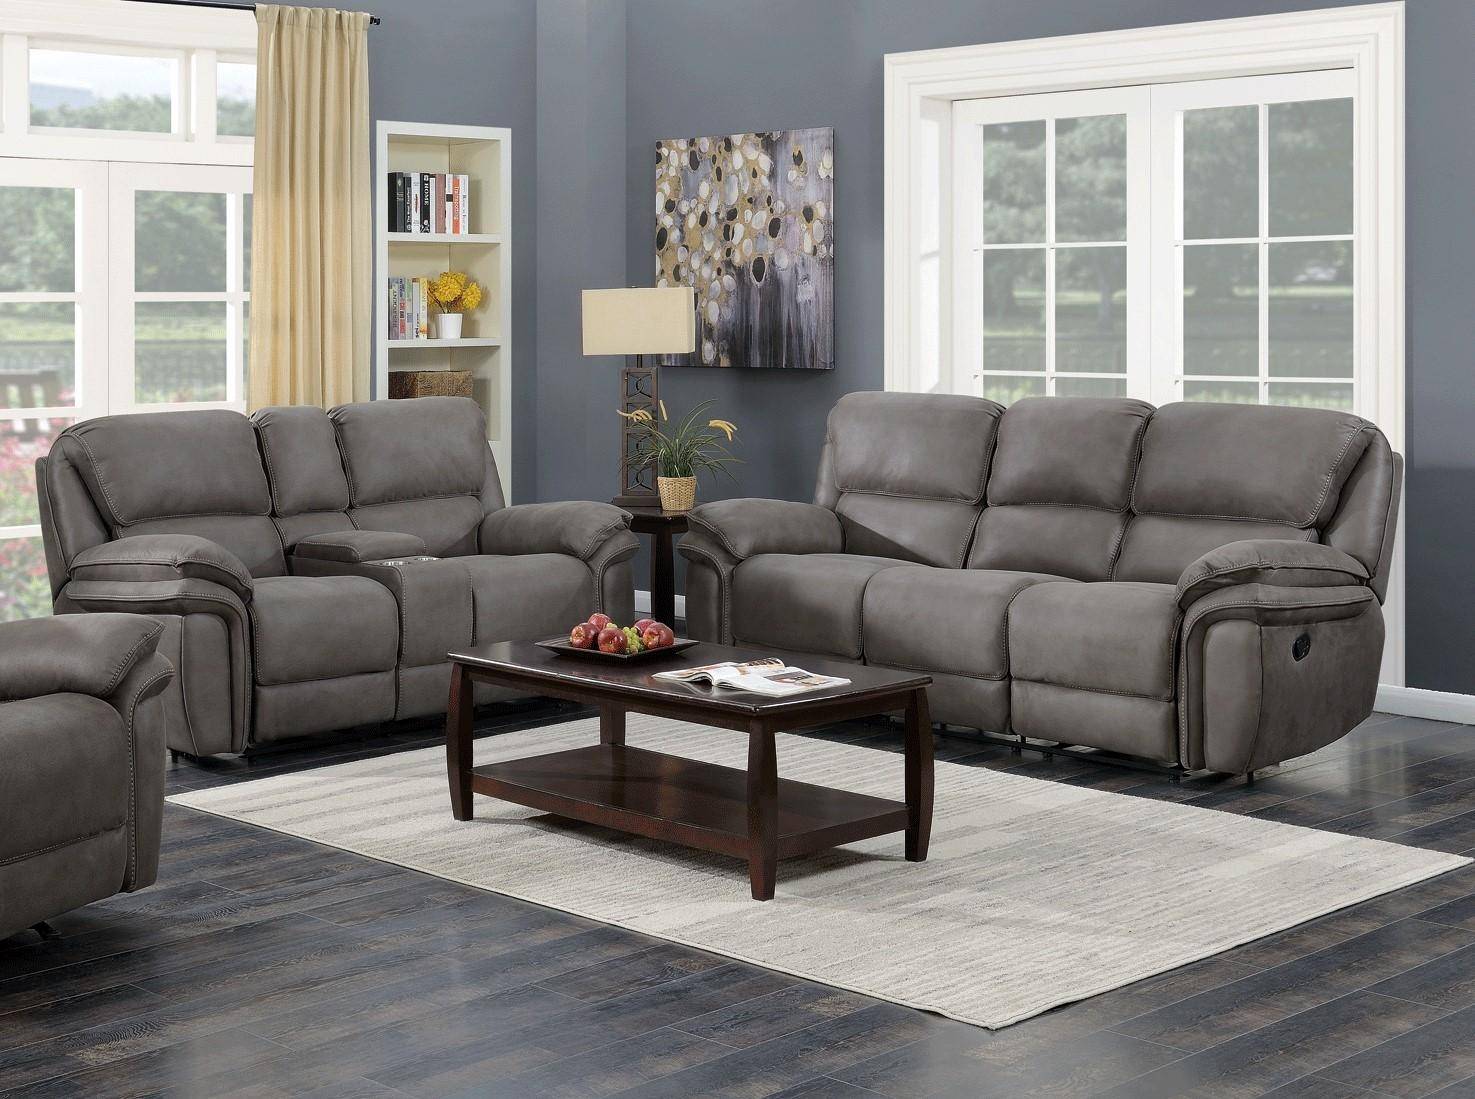 Esf Gabriel Recliner Sofa And Loveseat, Leather Sofa And Loveseat Recliner